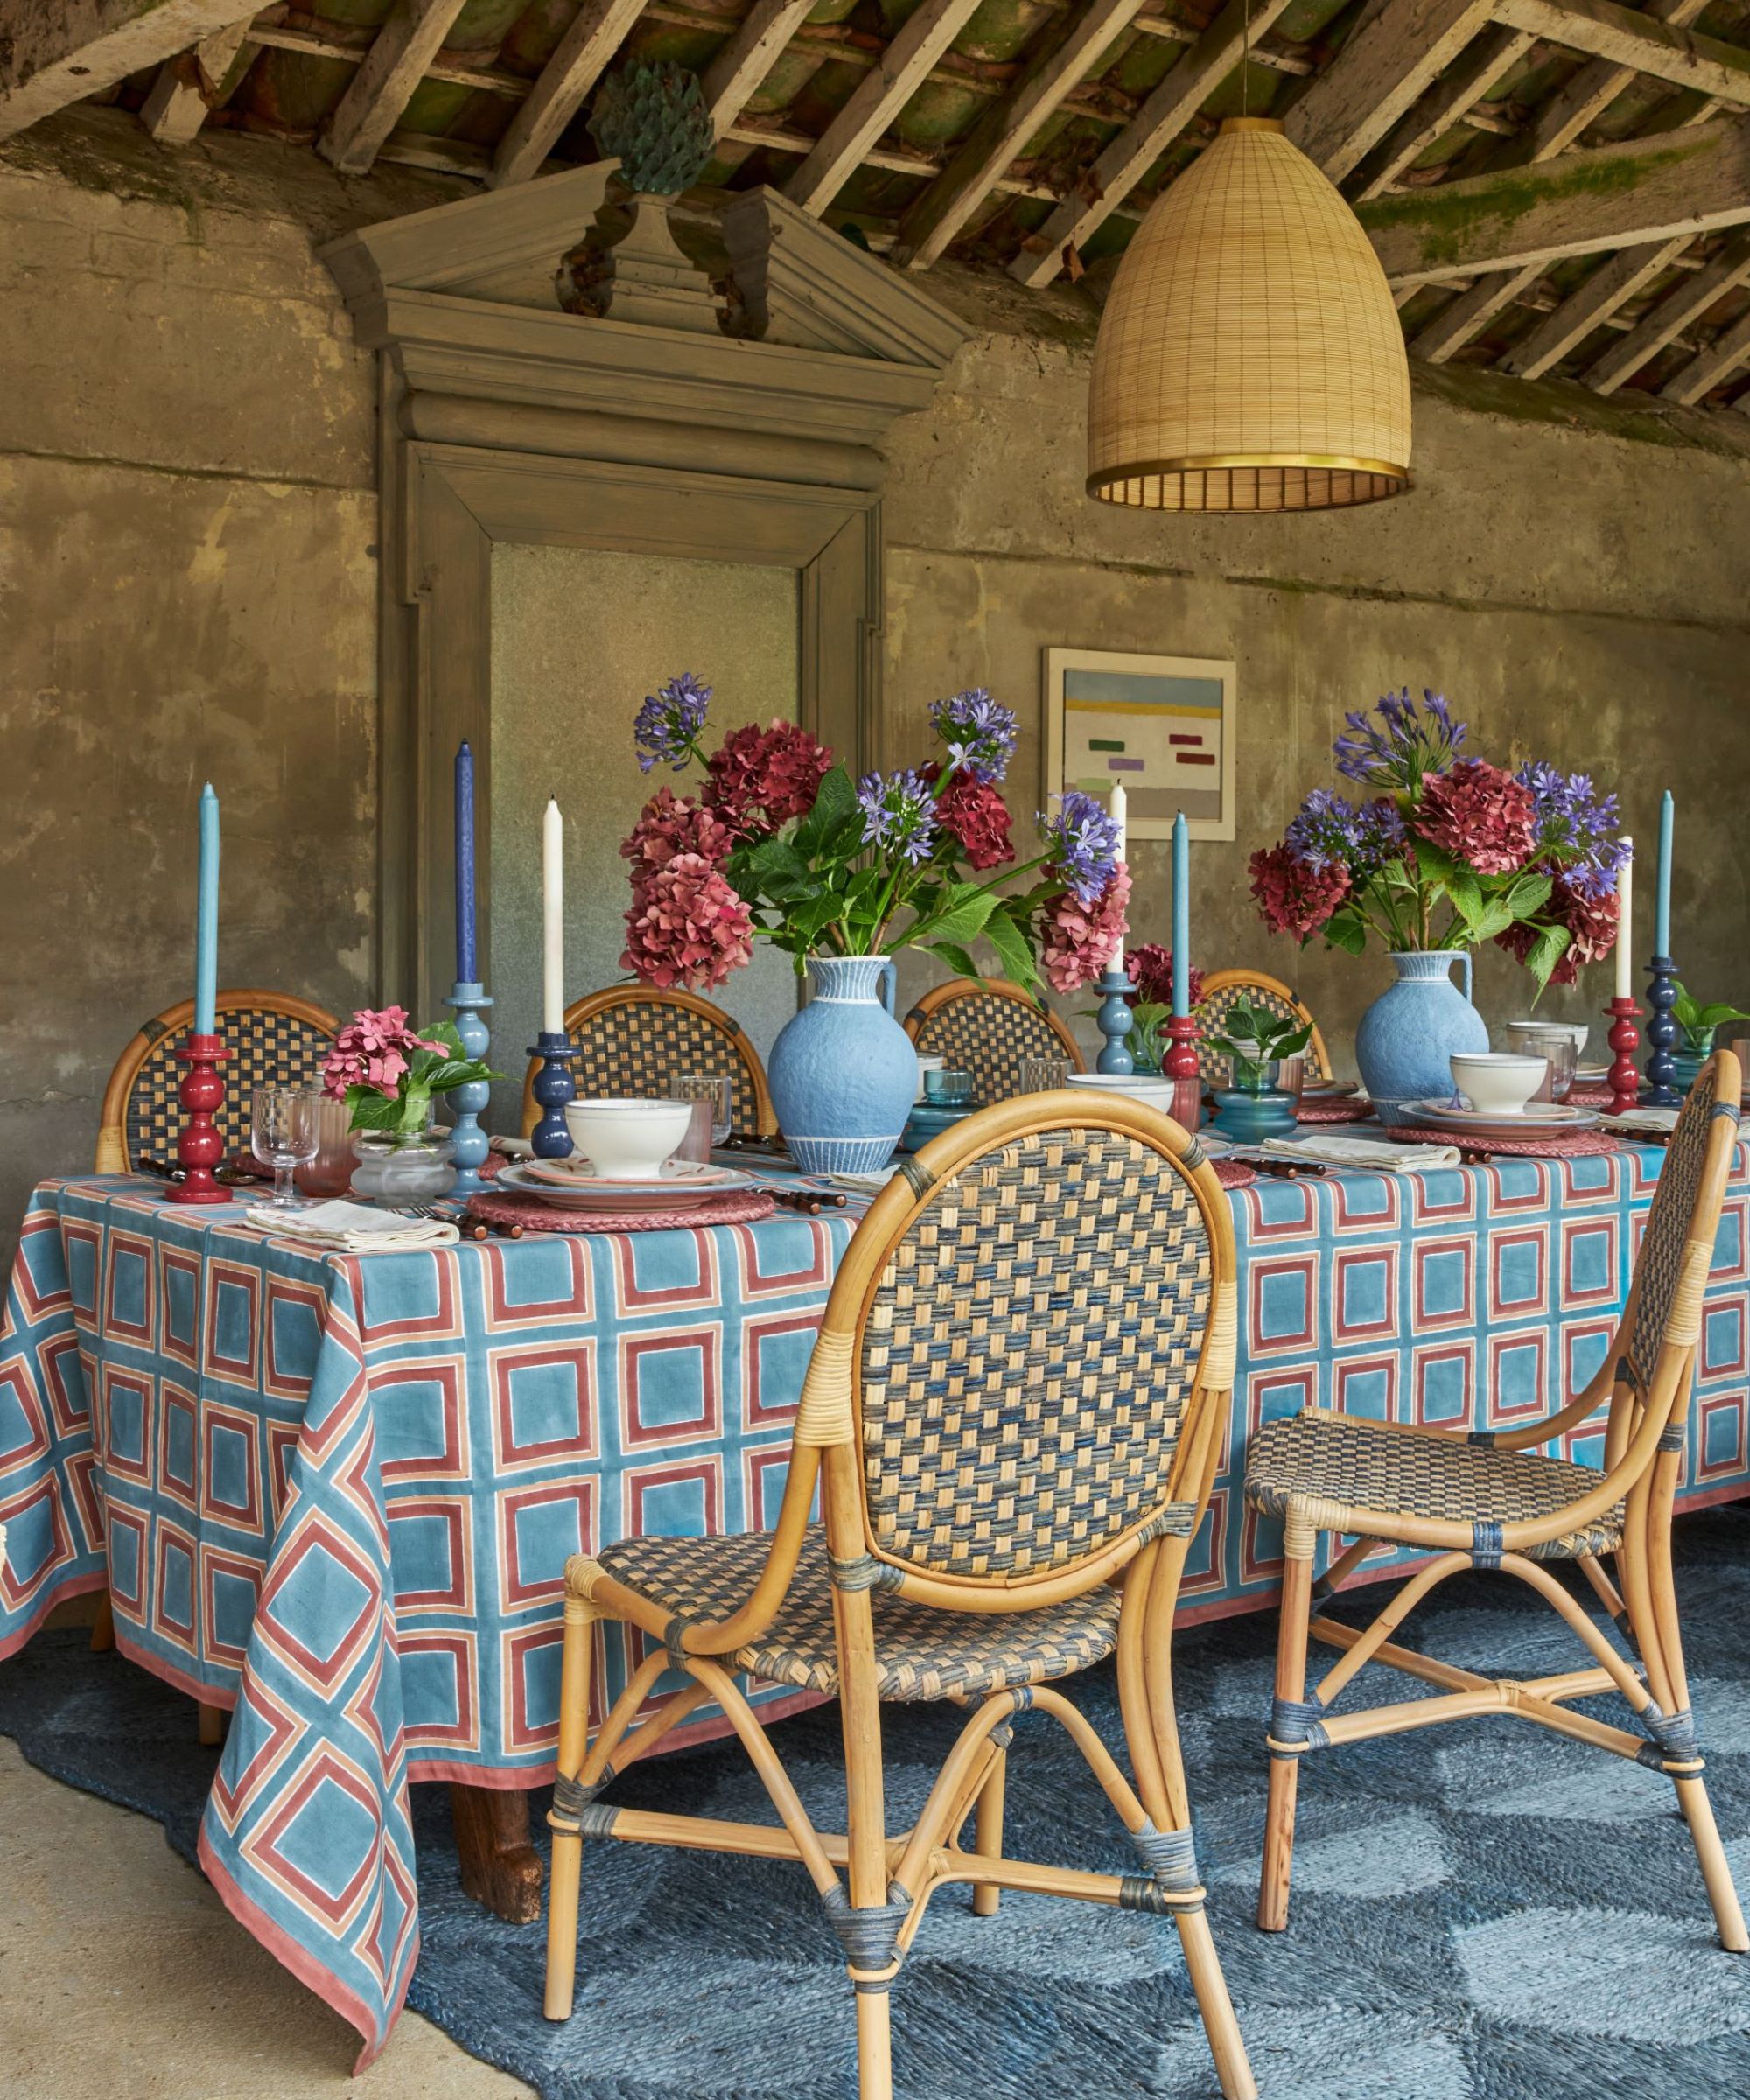 Dining table with blue and red colour scheme and rattan chairs